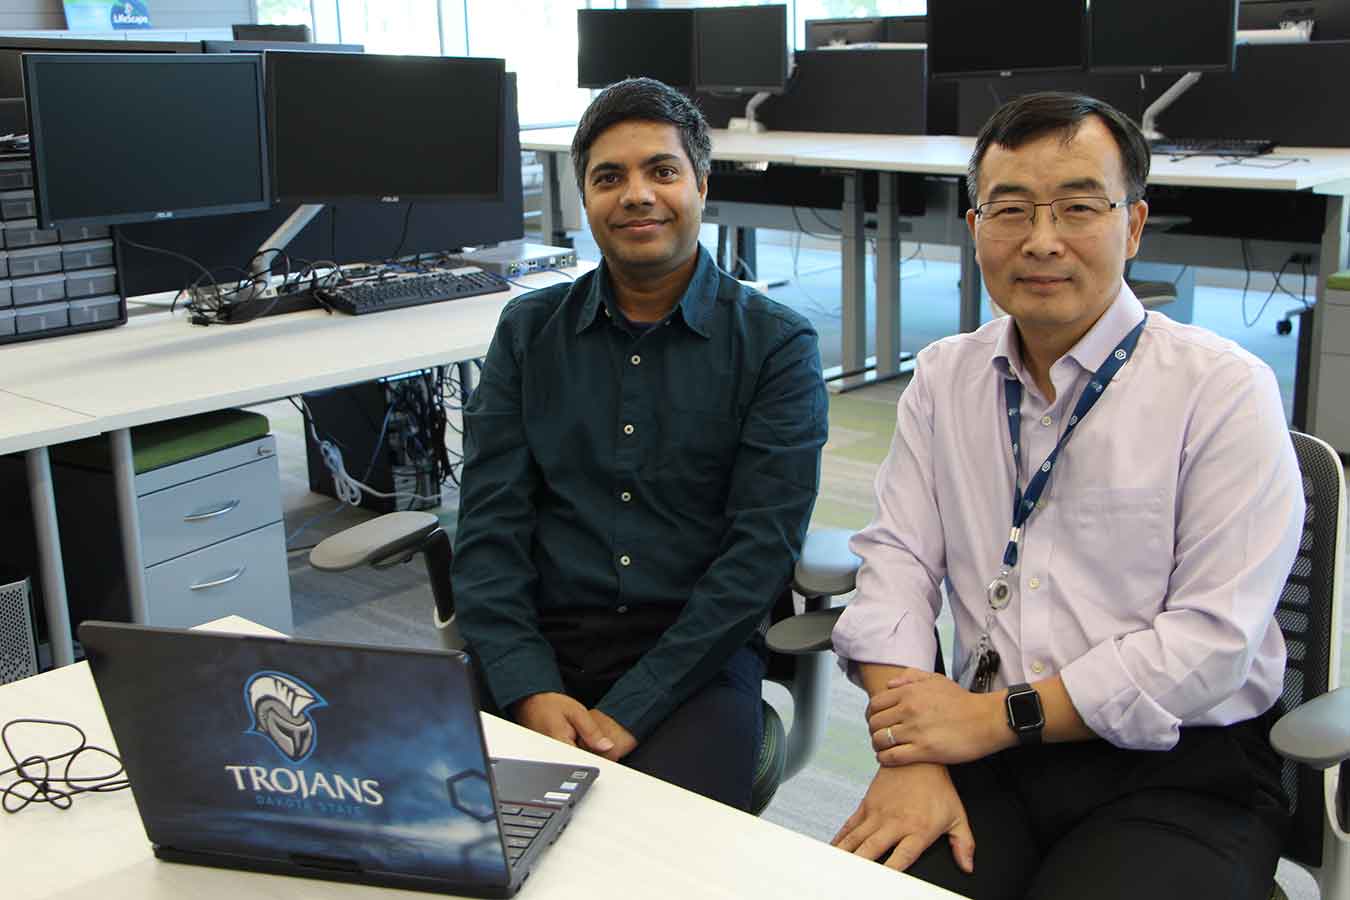 Dr. Bhaskar Rimal (left) and Dr. Yong Wang have received an NSA grant to study Internet of Things device identification. Wang is Associate Professor of Computer & Cyber Sciences, and Rimal is Assistant Professor of Computer & Cyber Sciences in The Beacom College of Computer and Cyber Sciences. They are co-directors of the PATRIOT Lab.ssor of Computer & Cyber Sciences